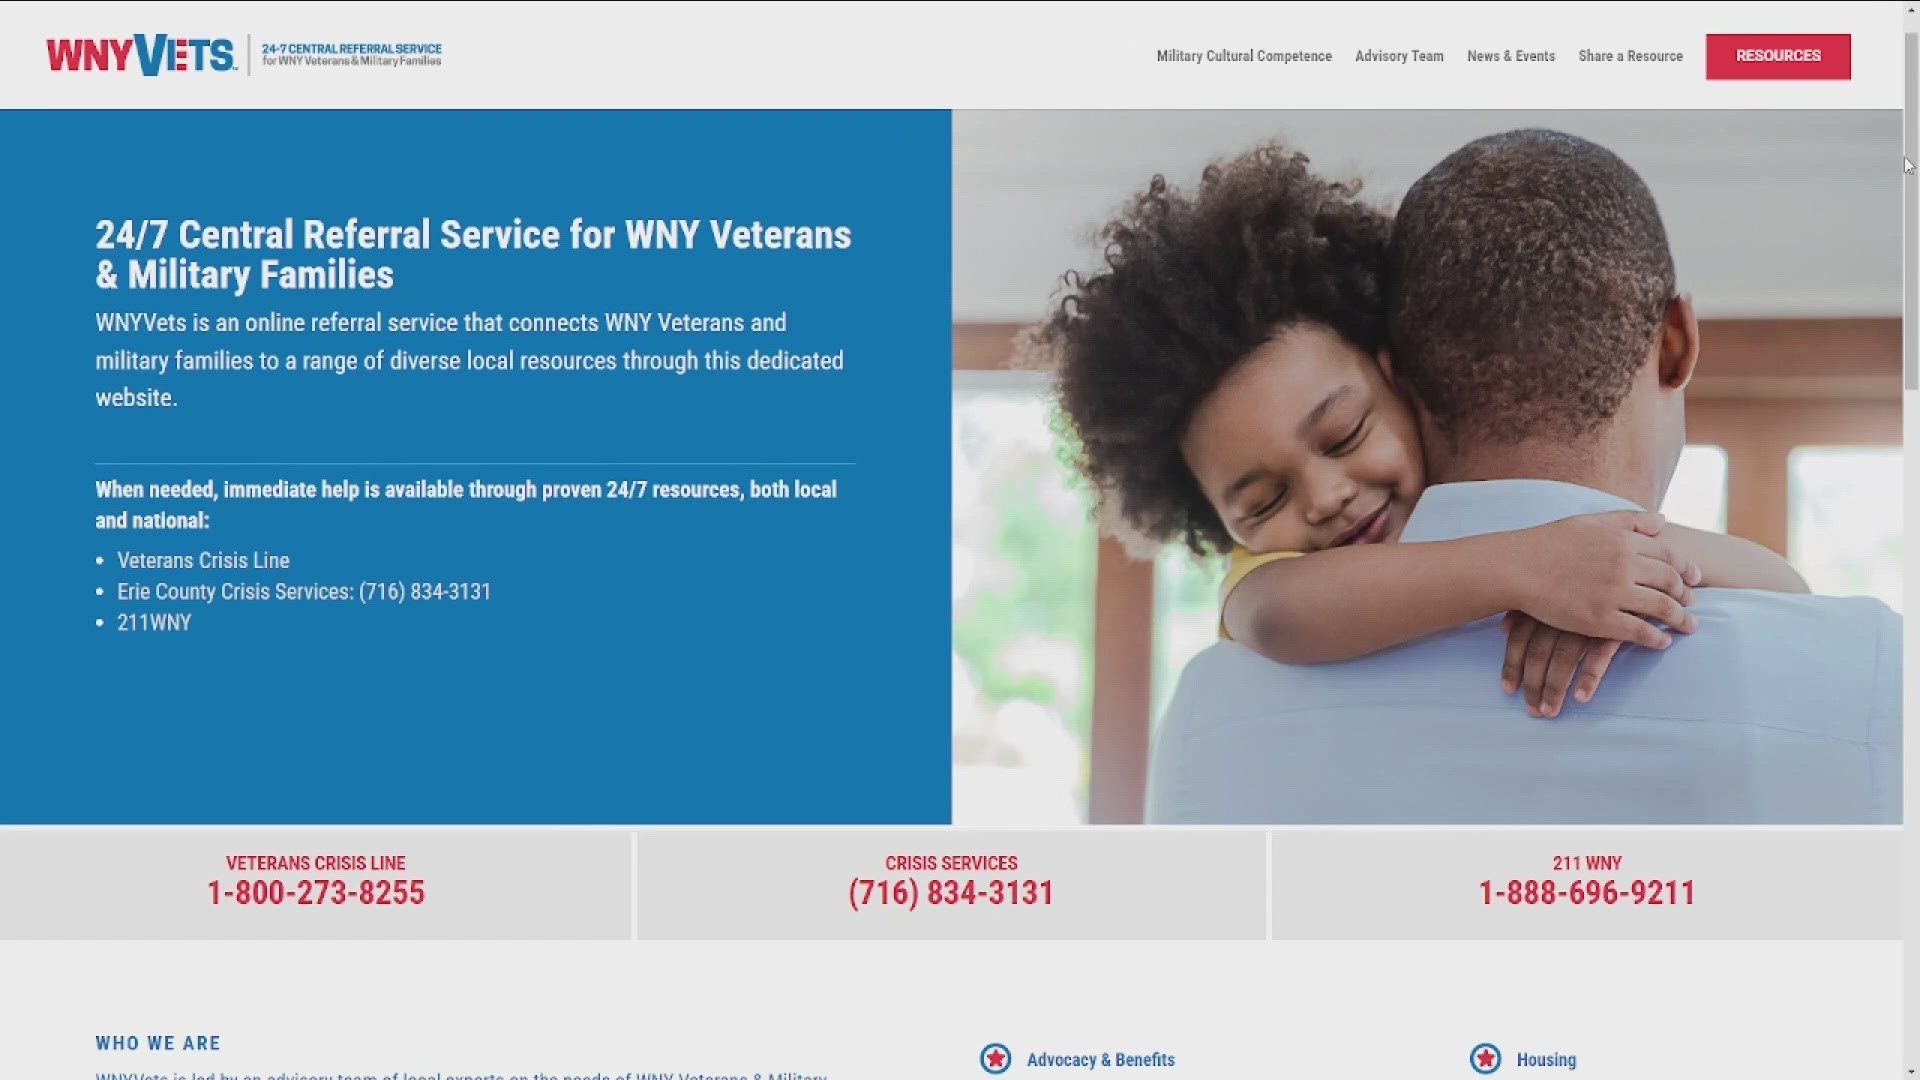 THIS WILL PROVIDE 24-SEVEN REFERRAL SERVICE FOR VETERANS... SPLIT INTO 11 DIFFERENT PROGRAMS.
THESE INCLUDE MENTAL HEALTH... HOUSING... AND EDUCATION